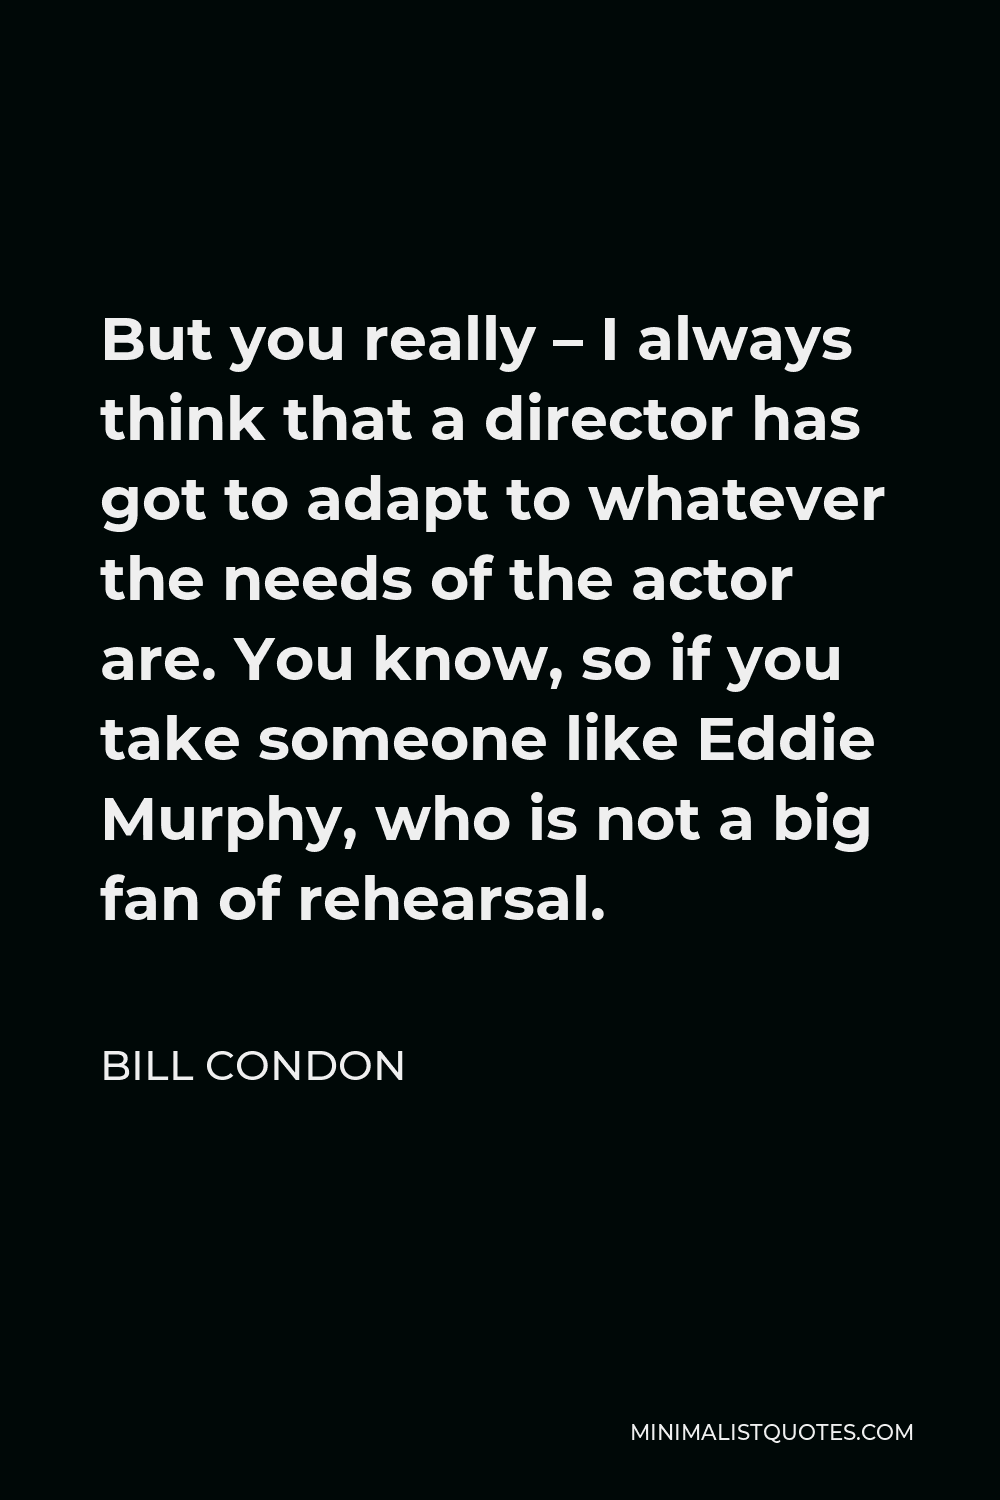 Bill Condon Quote - But you really – I always think that a director has got to adapt to whatever the needs of the actor are. You know, so if you take someone like Eddie Murphy, who is not a big fan of rehearsal.